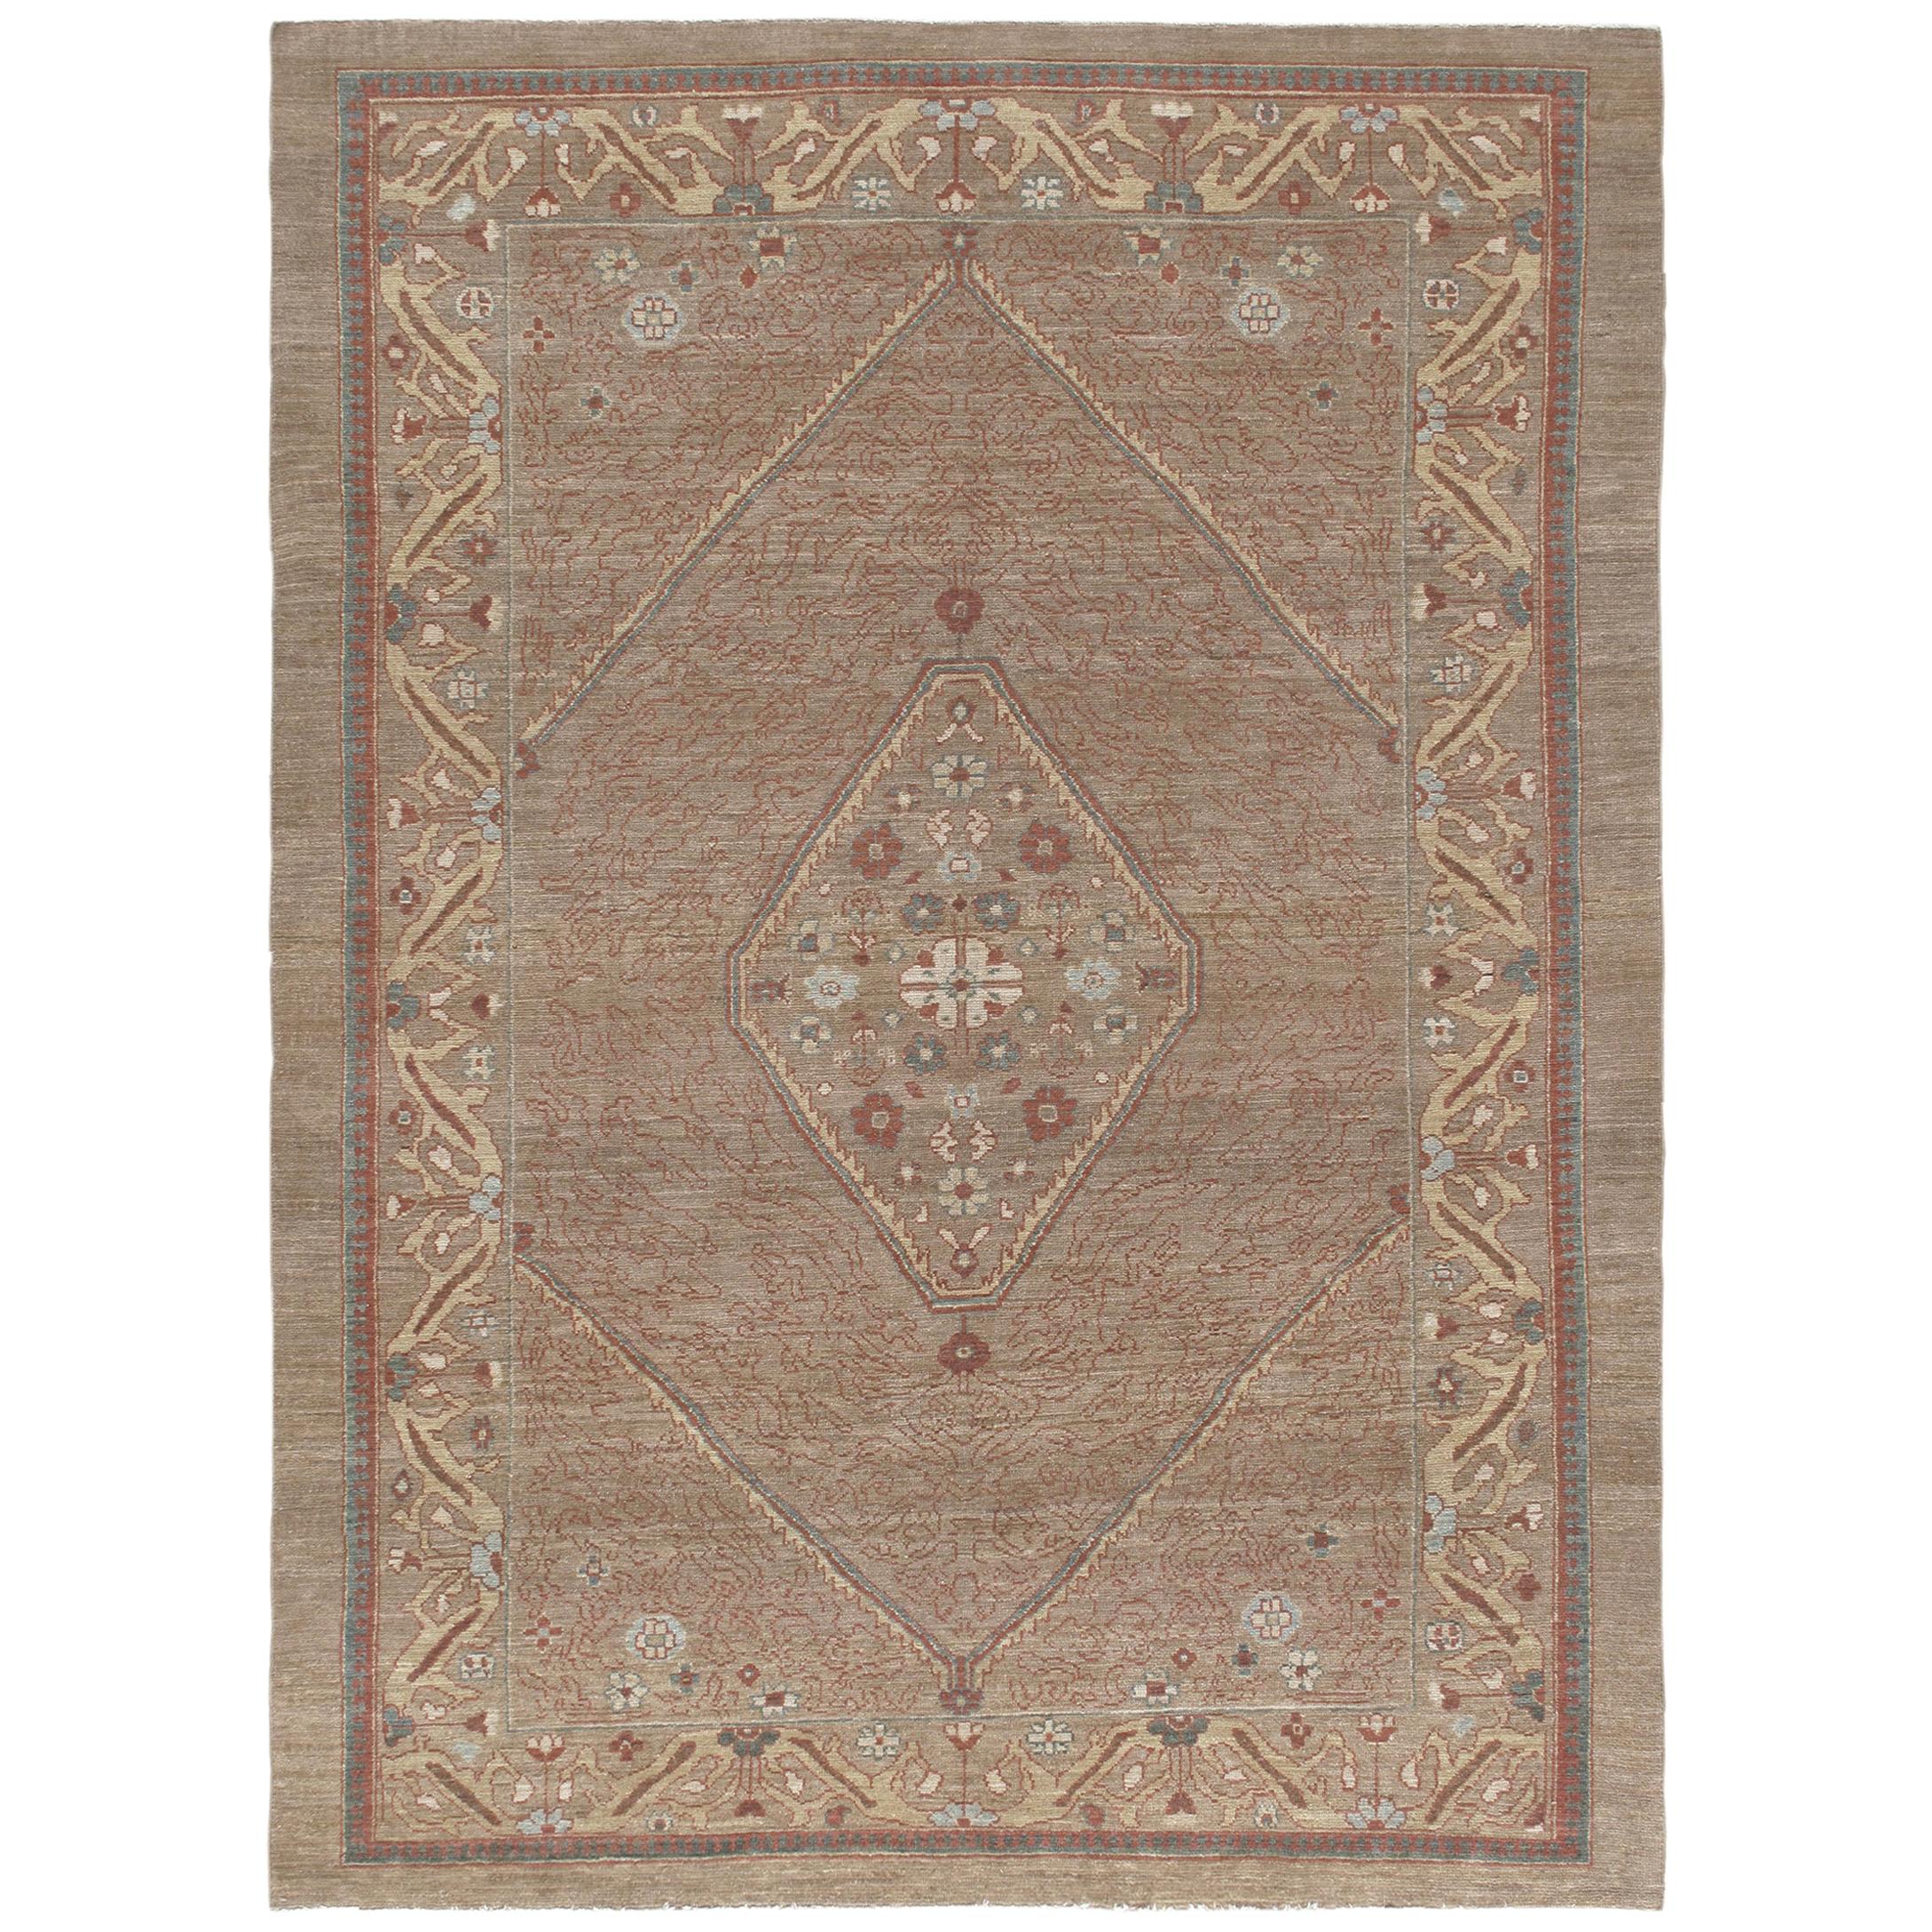 Persian Traditional Kurdish Handknotted Rug in Camel and Rust Colors